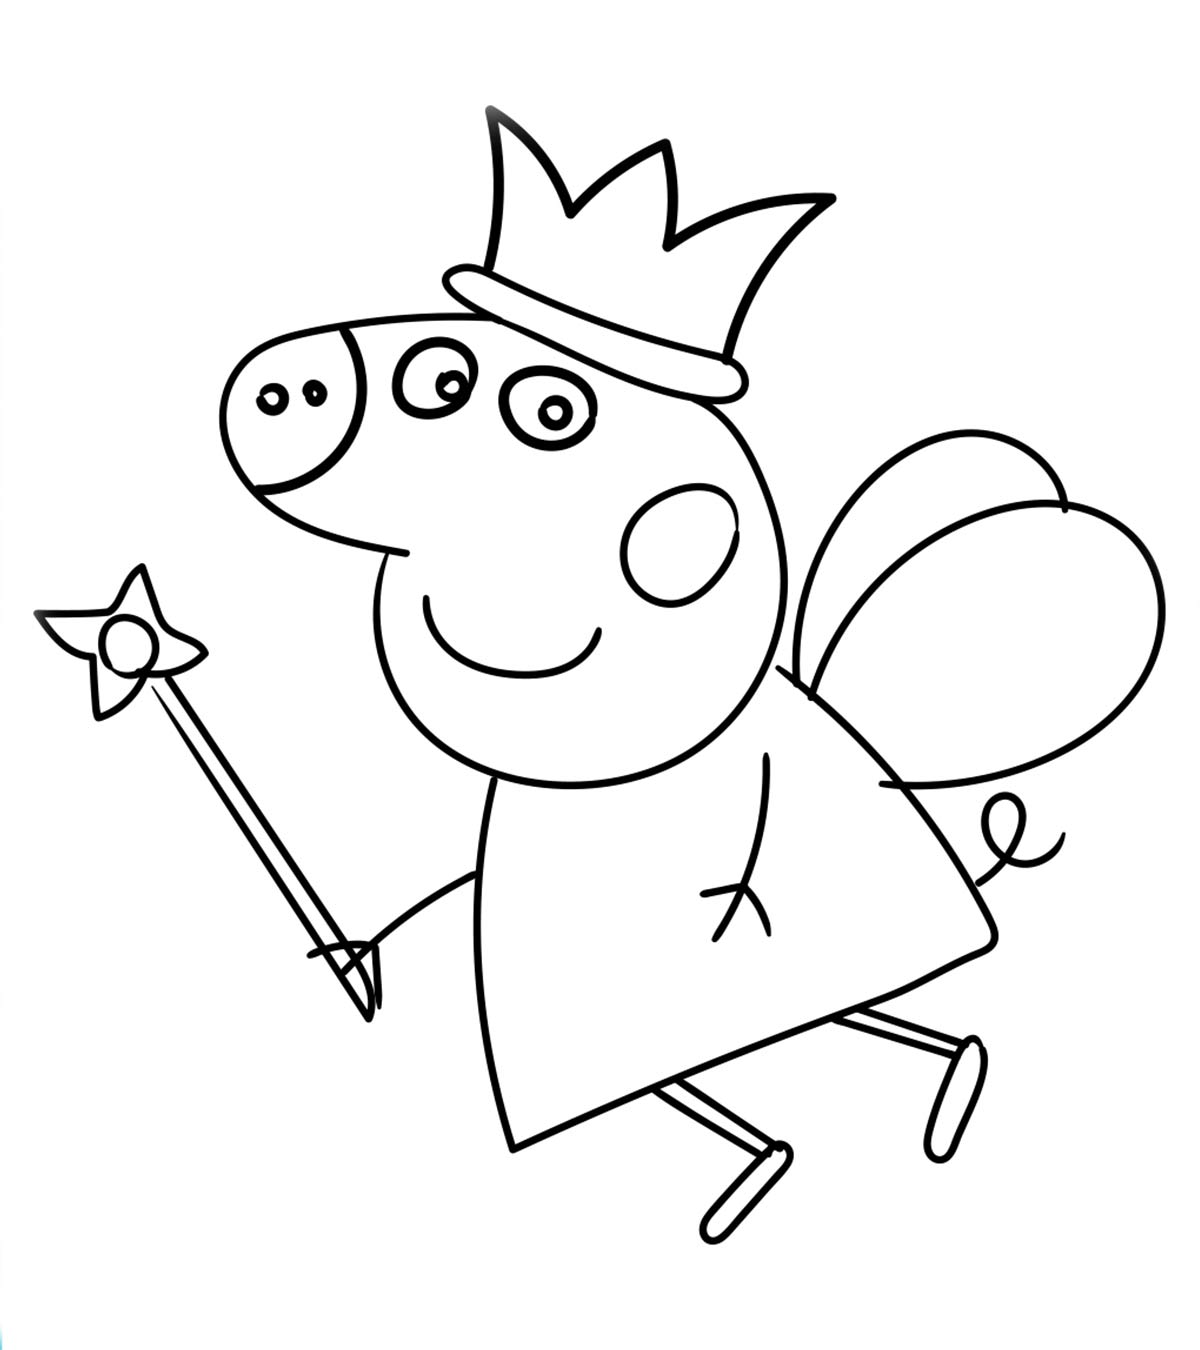 Cartoon Coloring Pages MomJunction